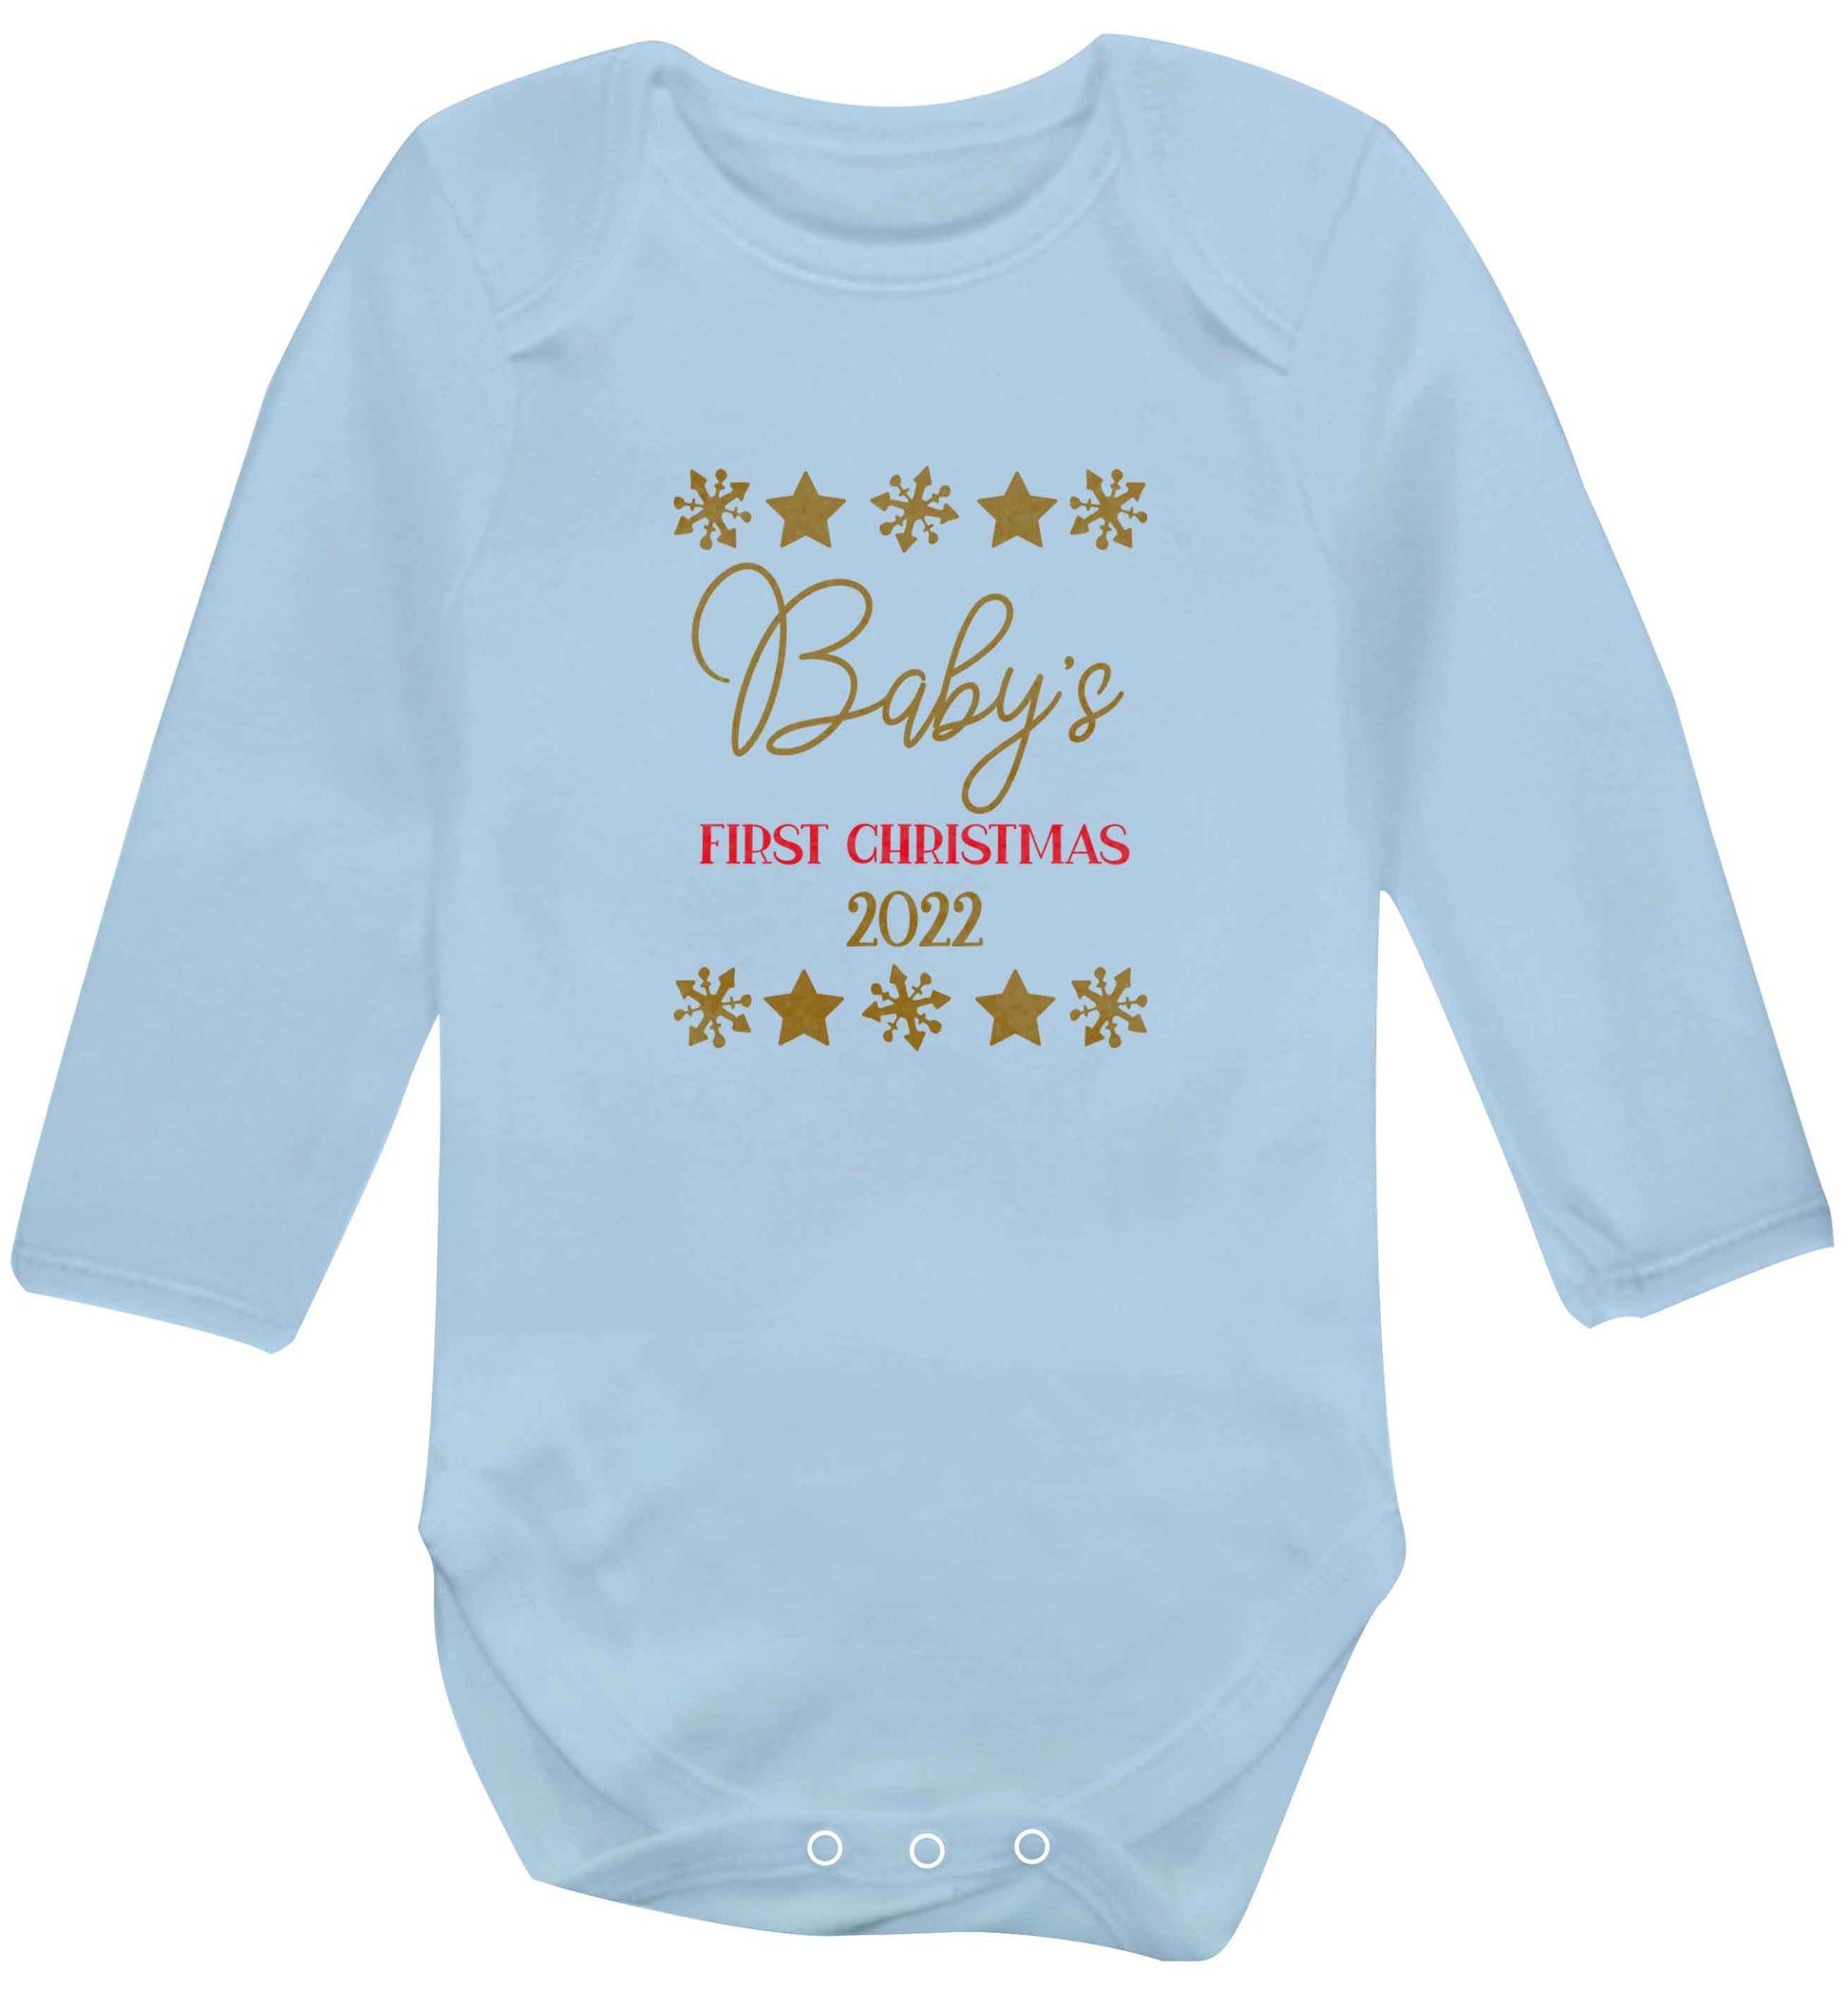 Baby's first Christmas baby vest long sleeved pale blue 6-12 months